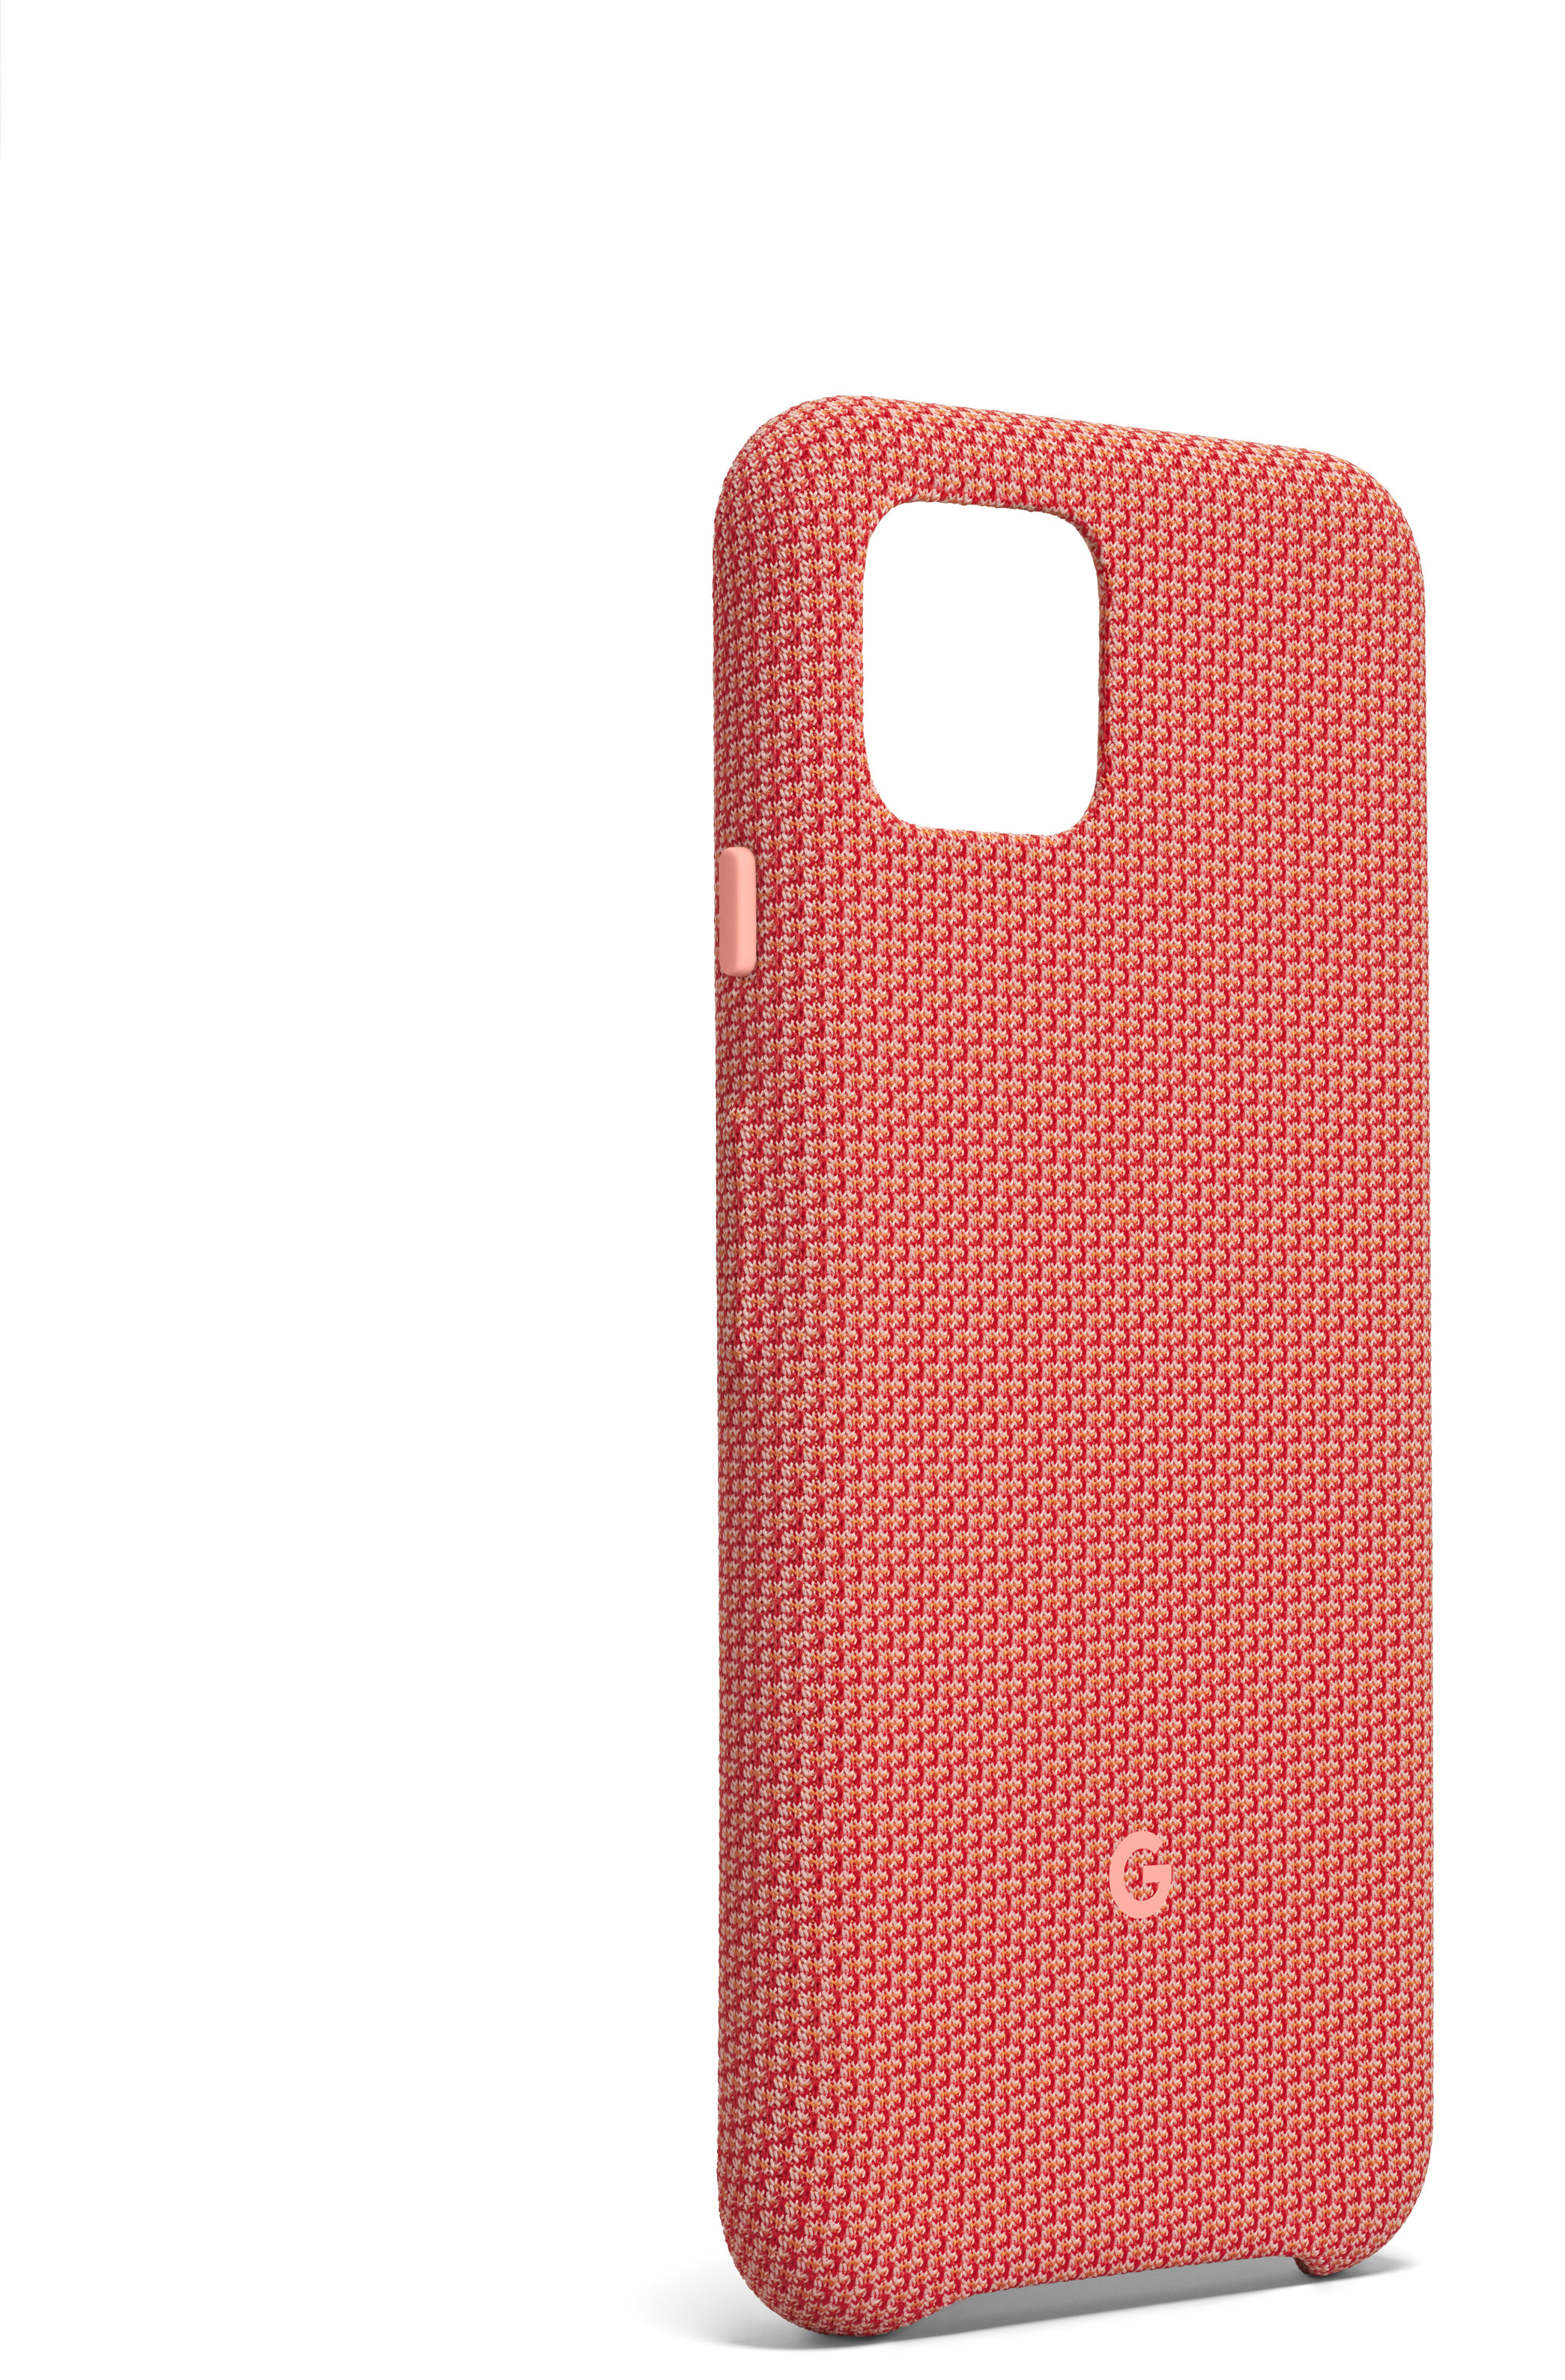 GOOGLE GA01282, Backcover, Google, Pixel Coral be 4, Could